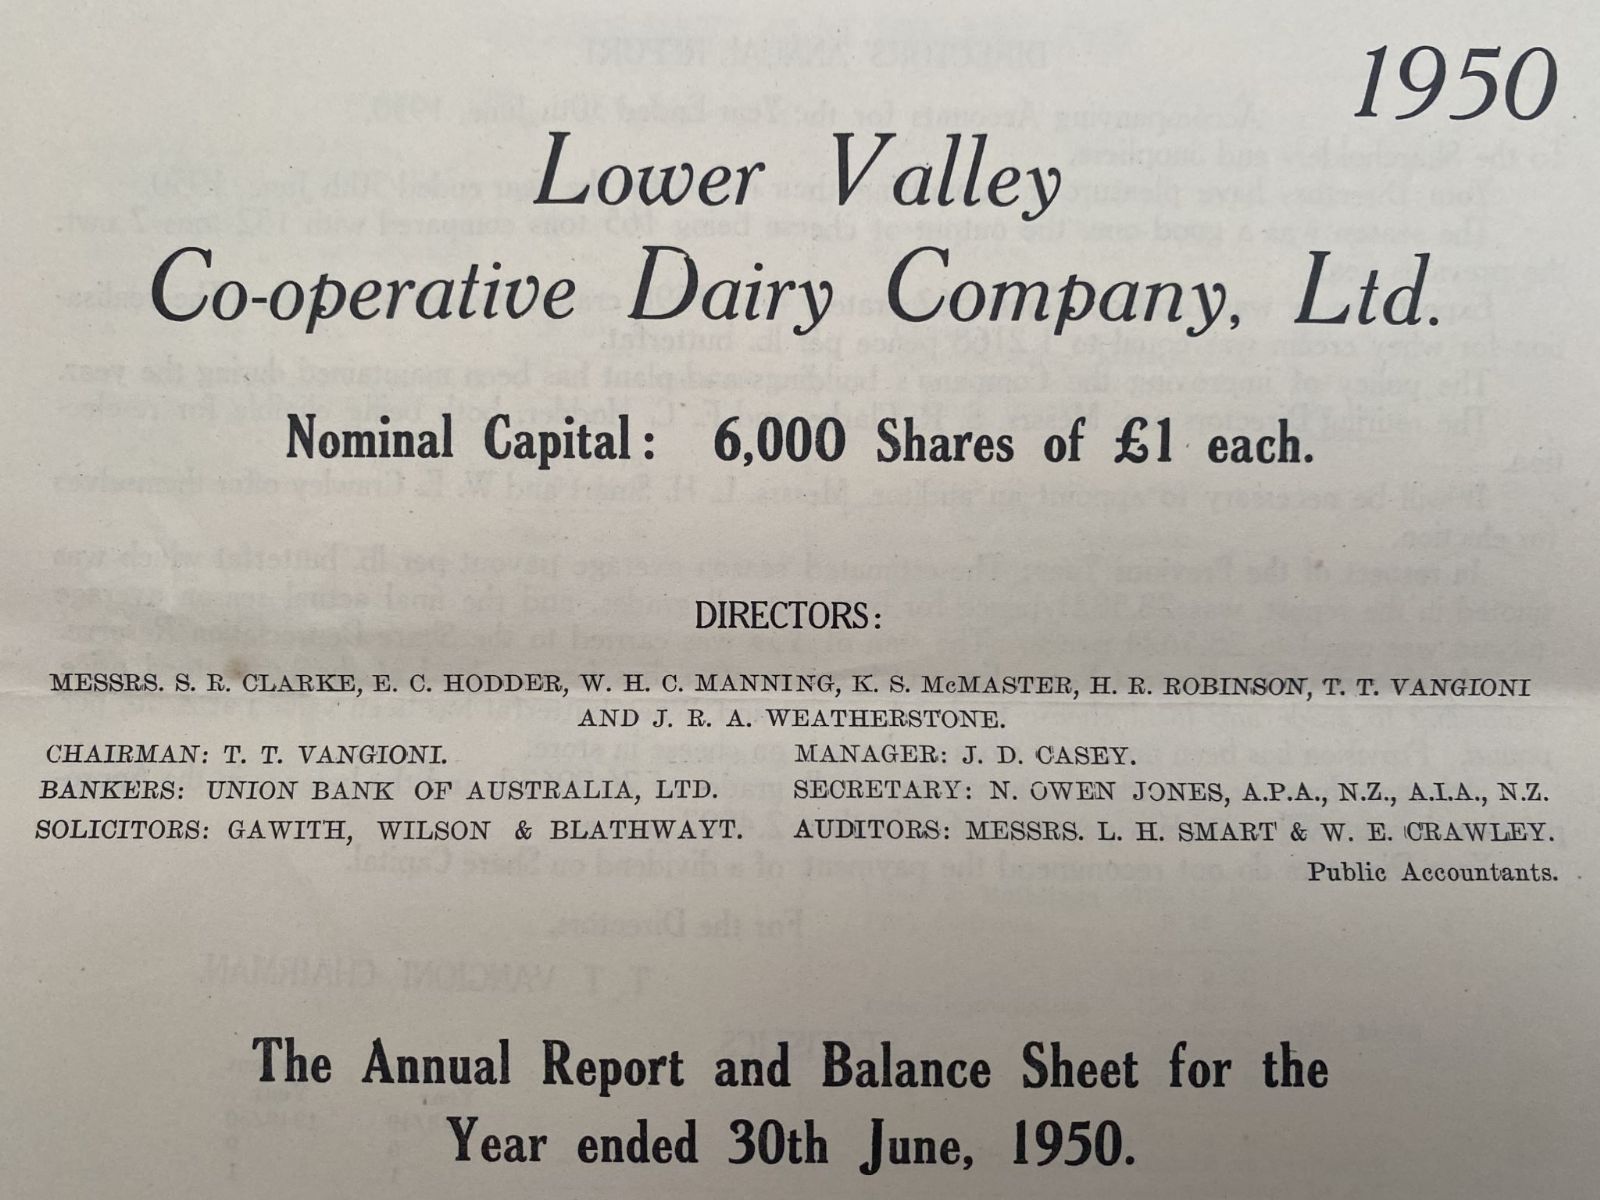 LOWER VALLEY CO-OP DAIRY COMPANY Ltd - Annual Report 1950